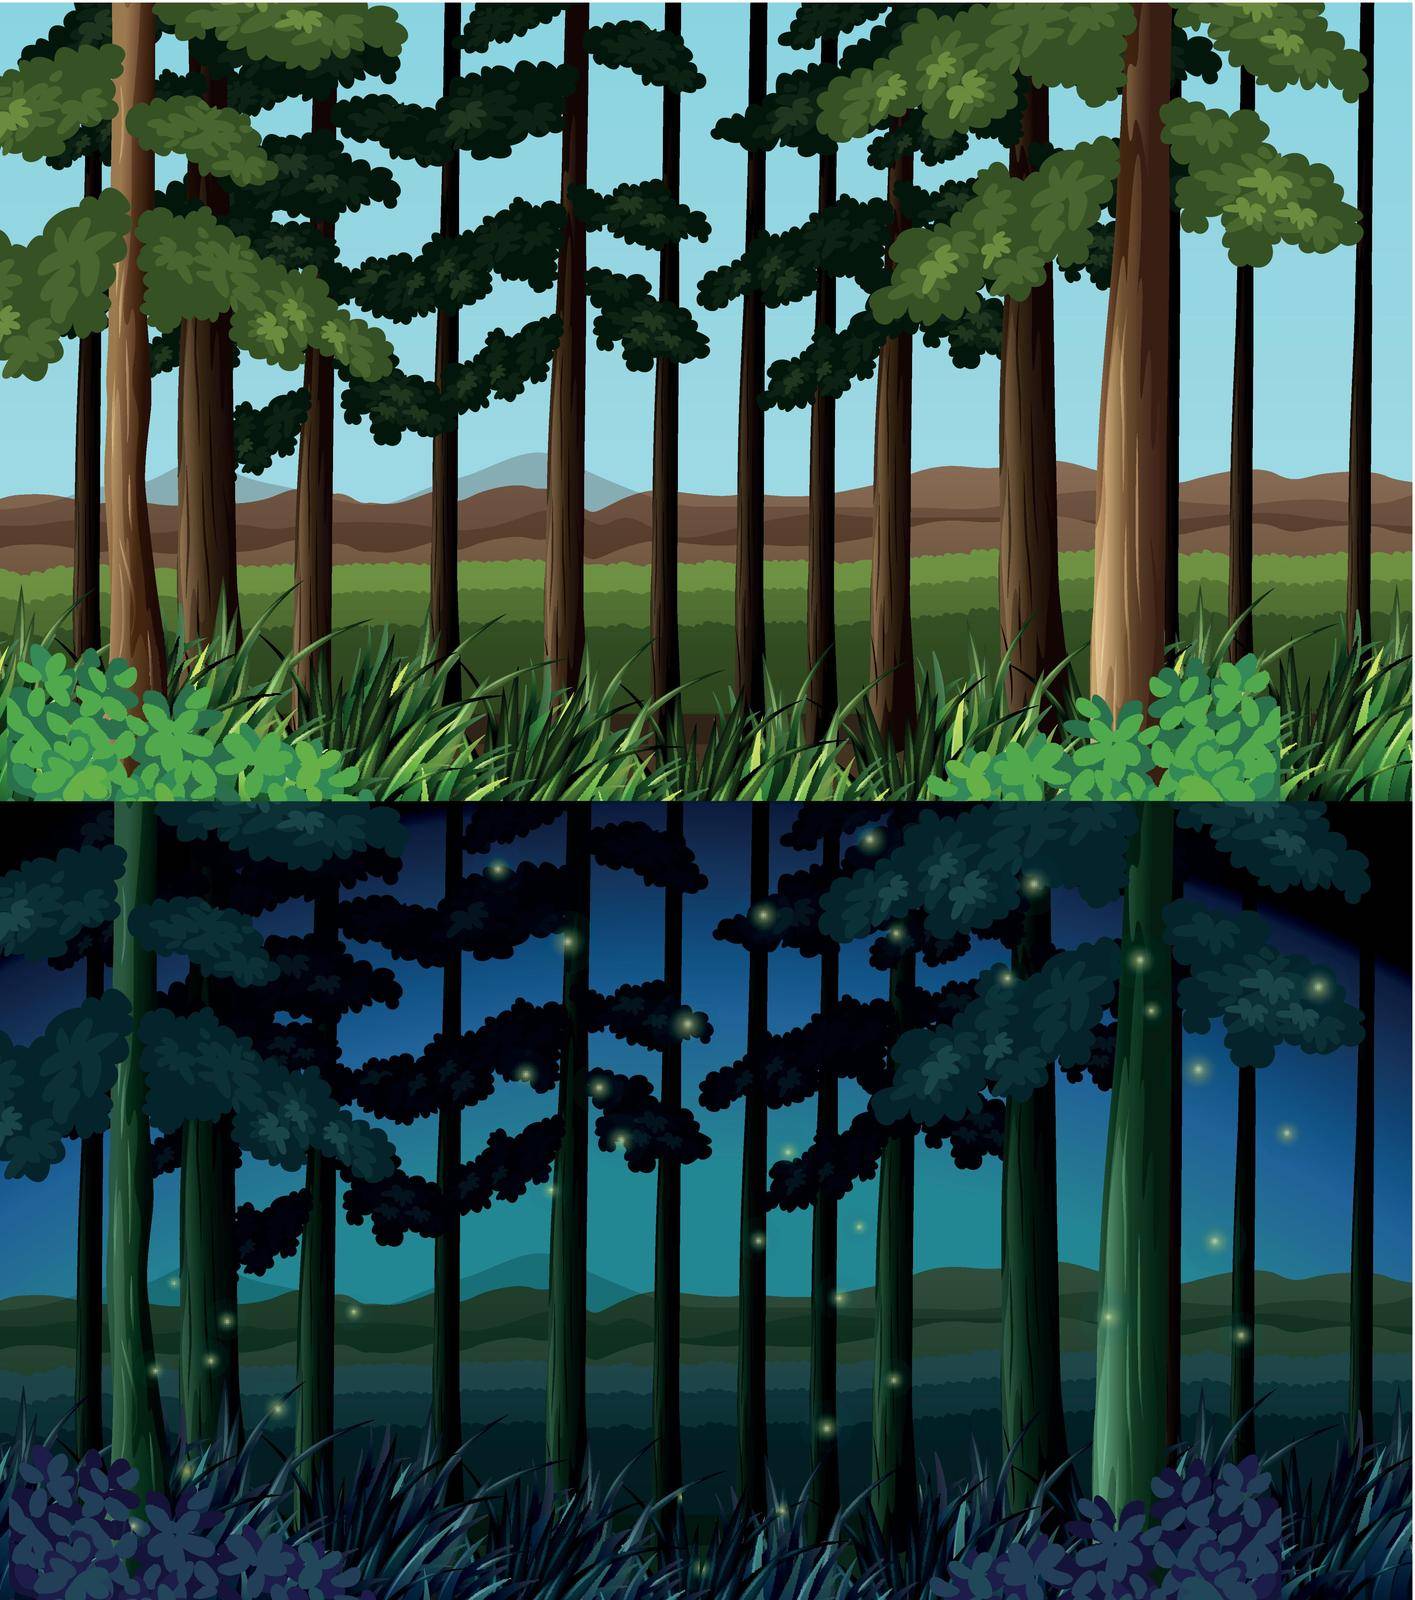 Forest scene at day time and night time by iimages